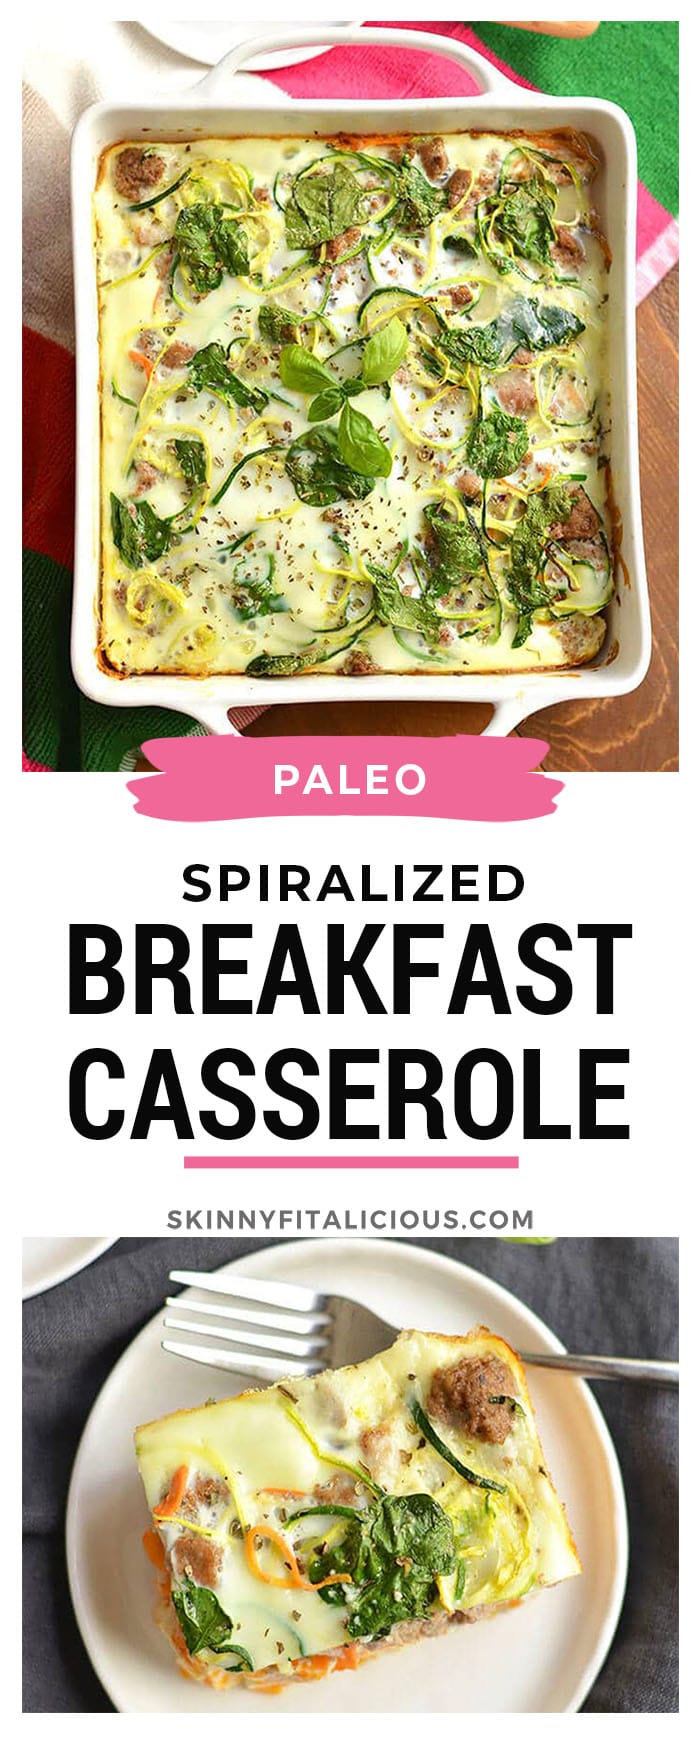 Wake up to a healthy Spiralized Breakfast Casserole made with wholesome ingredients, bursting with comforting flavors and packed with 20 grams of protein. This is one breakfast you will want to wake to! Paleo + Gluten Free + Low Carb + Low Calorie